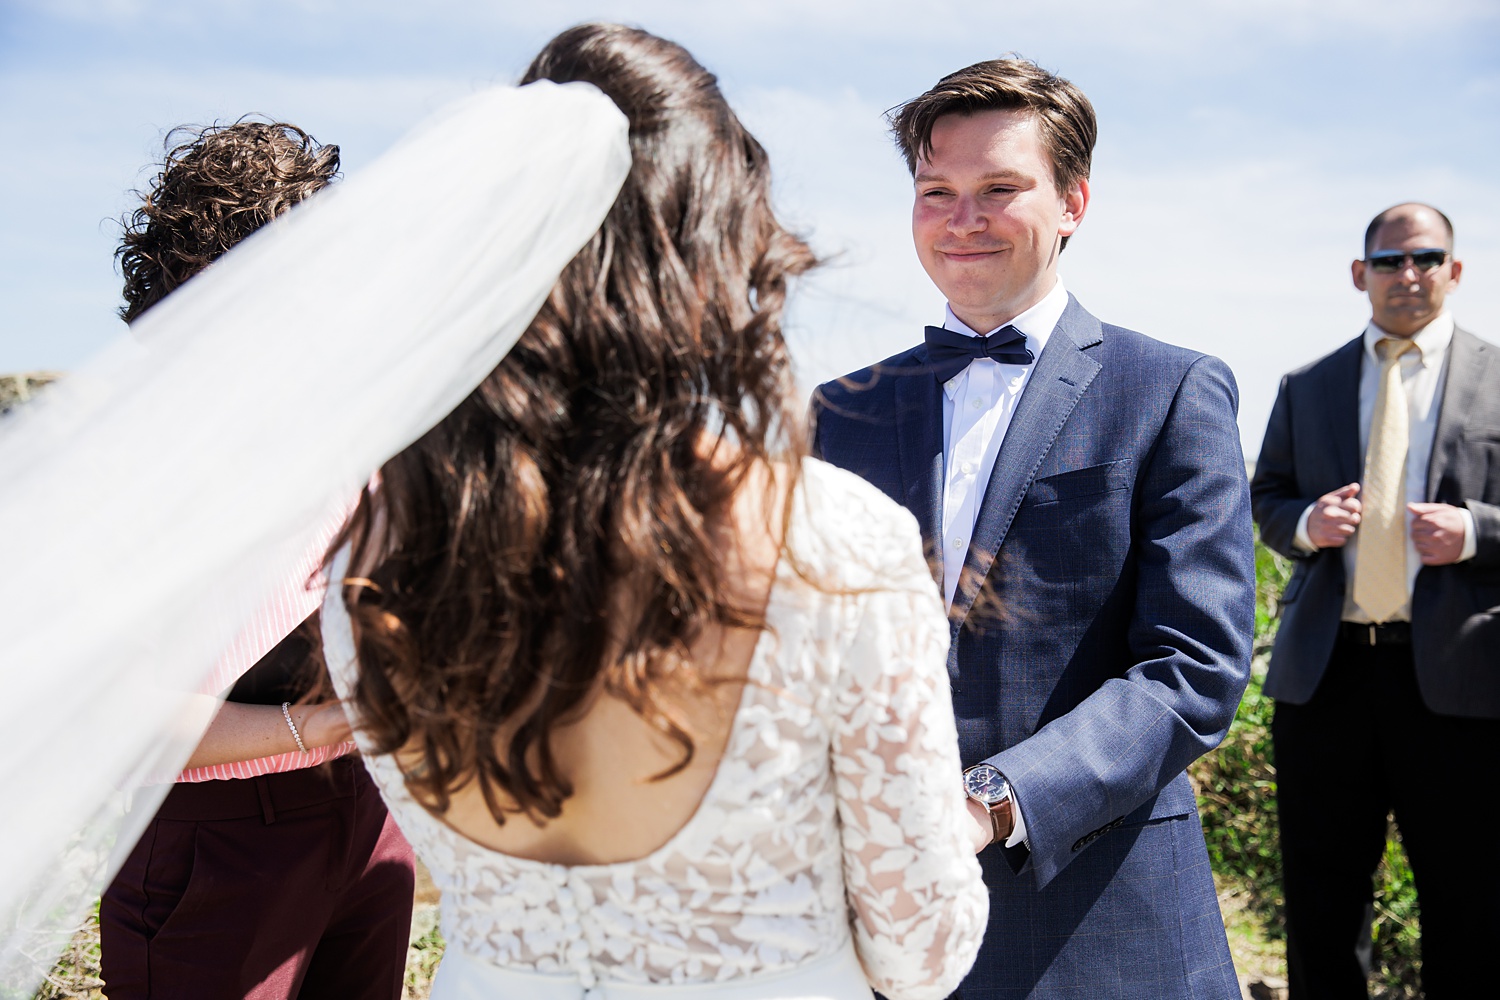 The groom looks lovingly at the bride during their outdoor ceremony